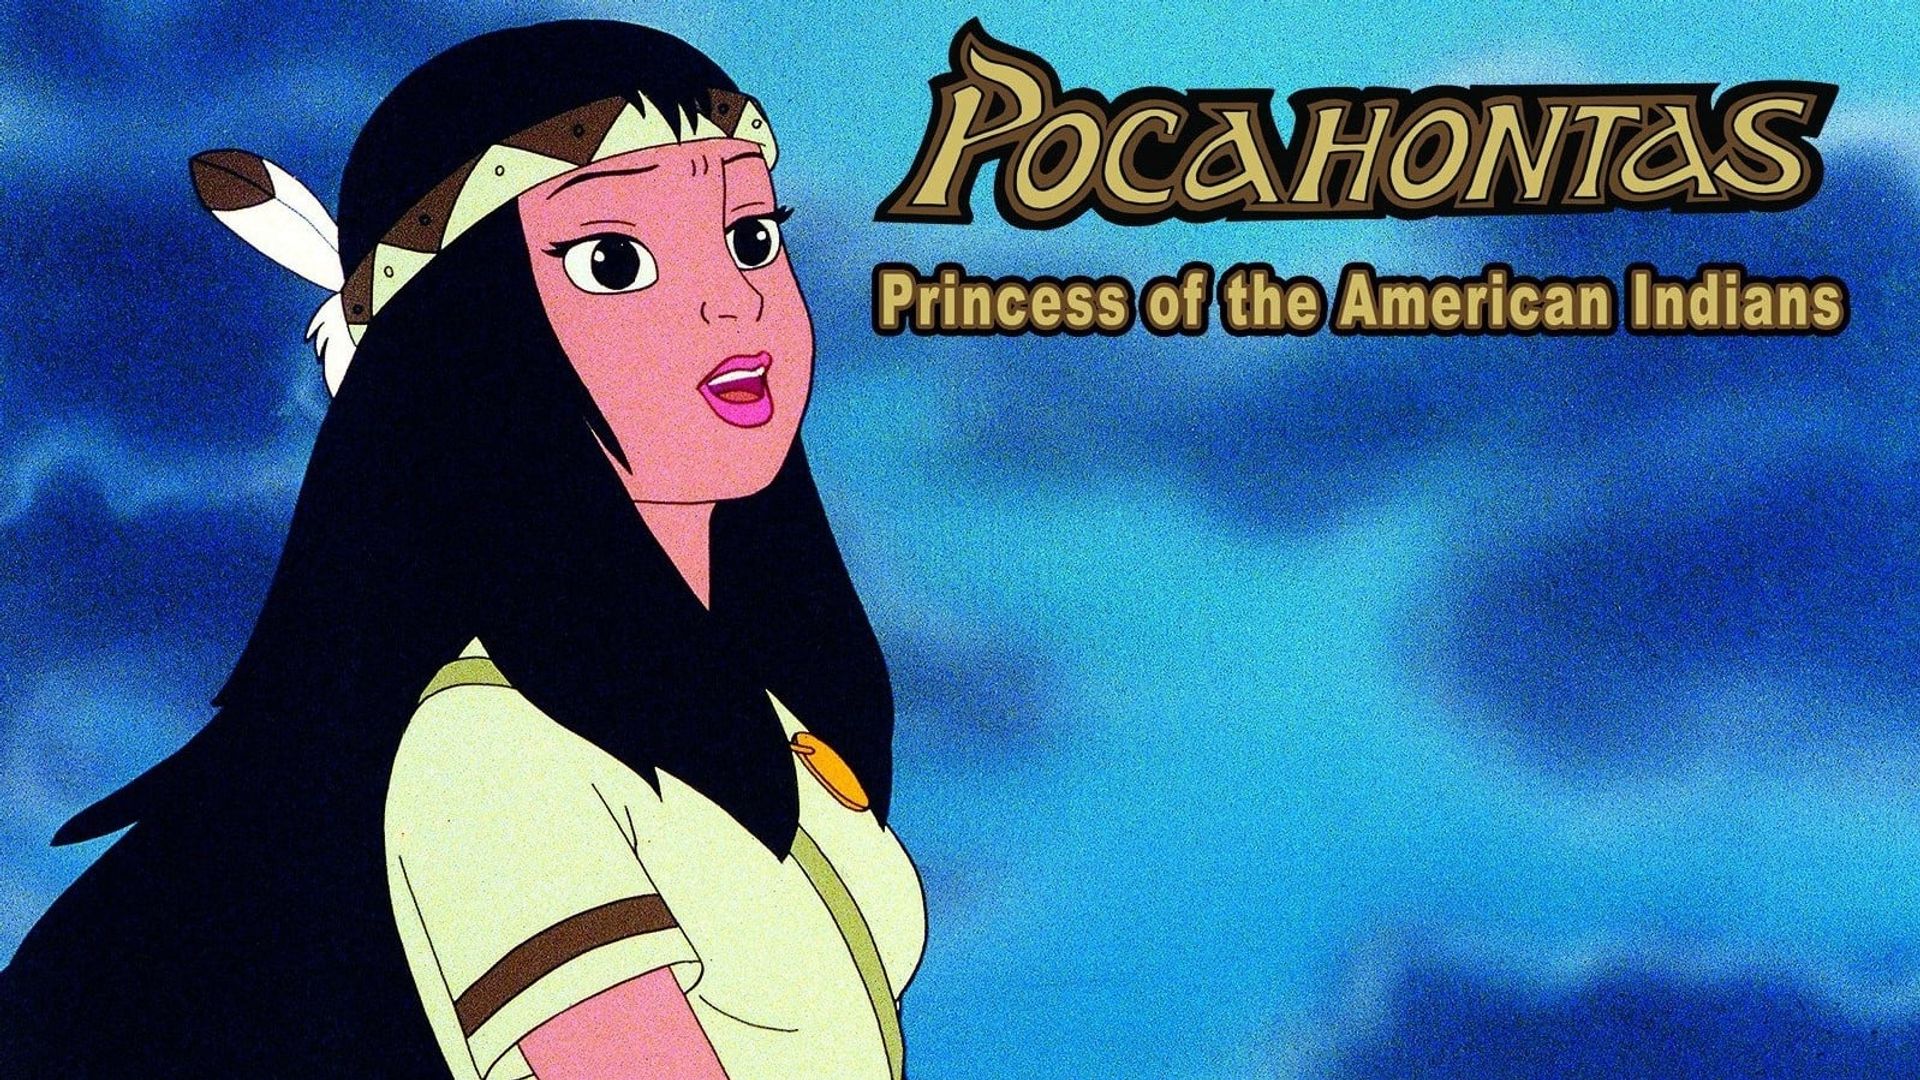 Pocahontas: Princess of the American Indians background